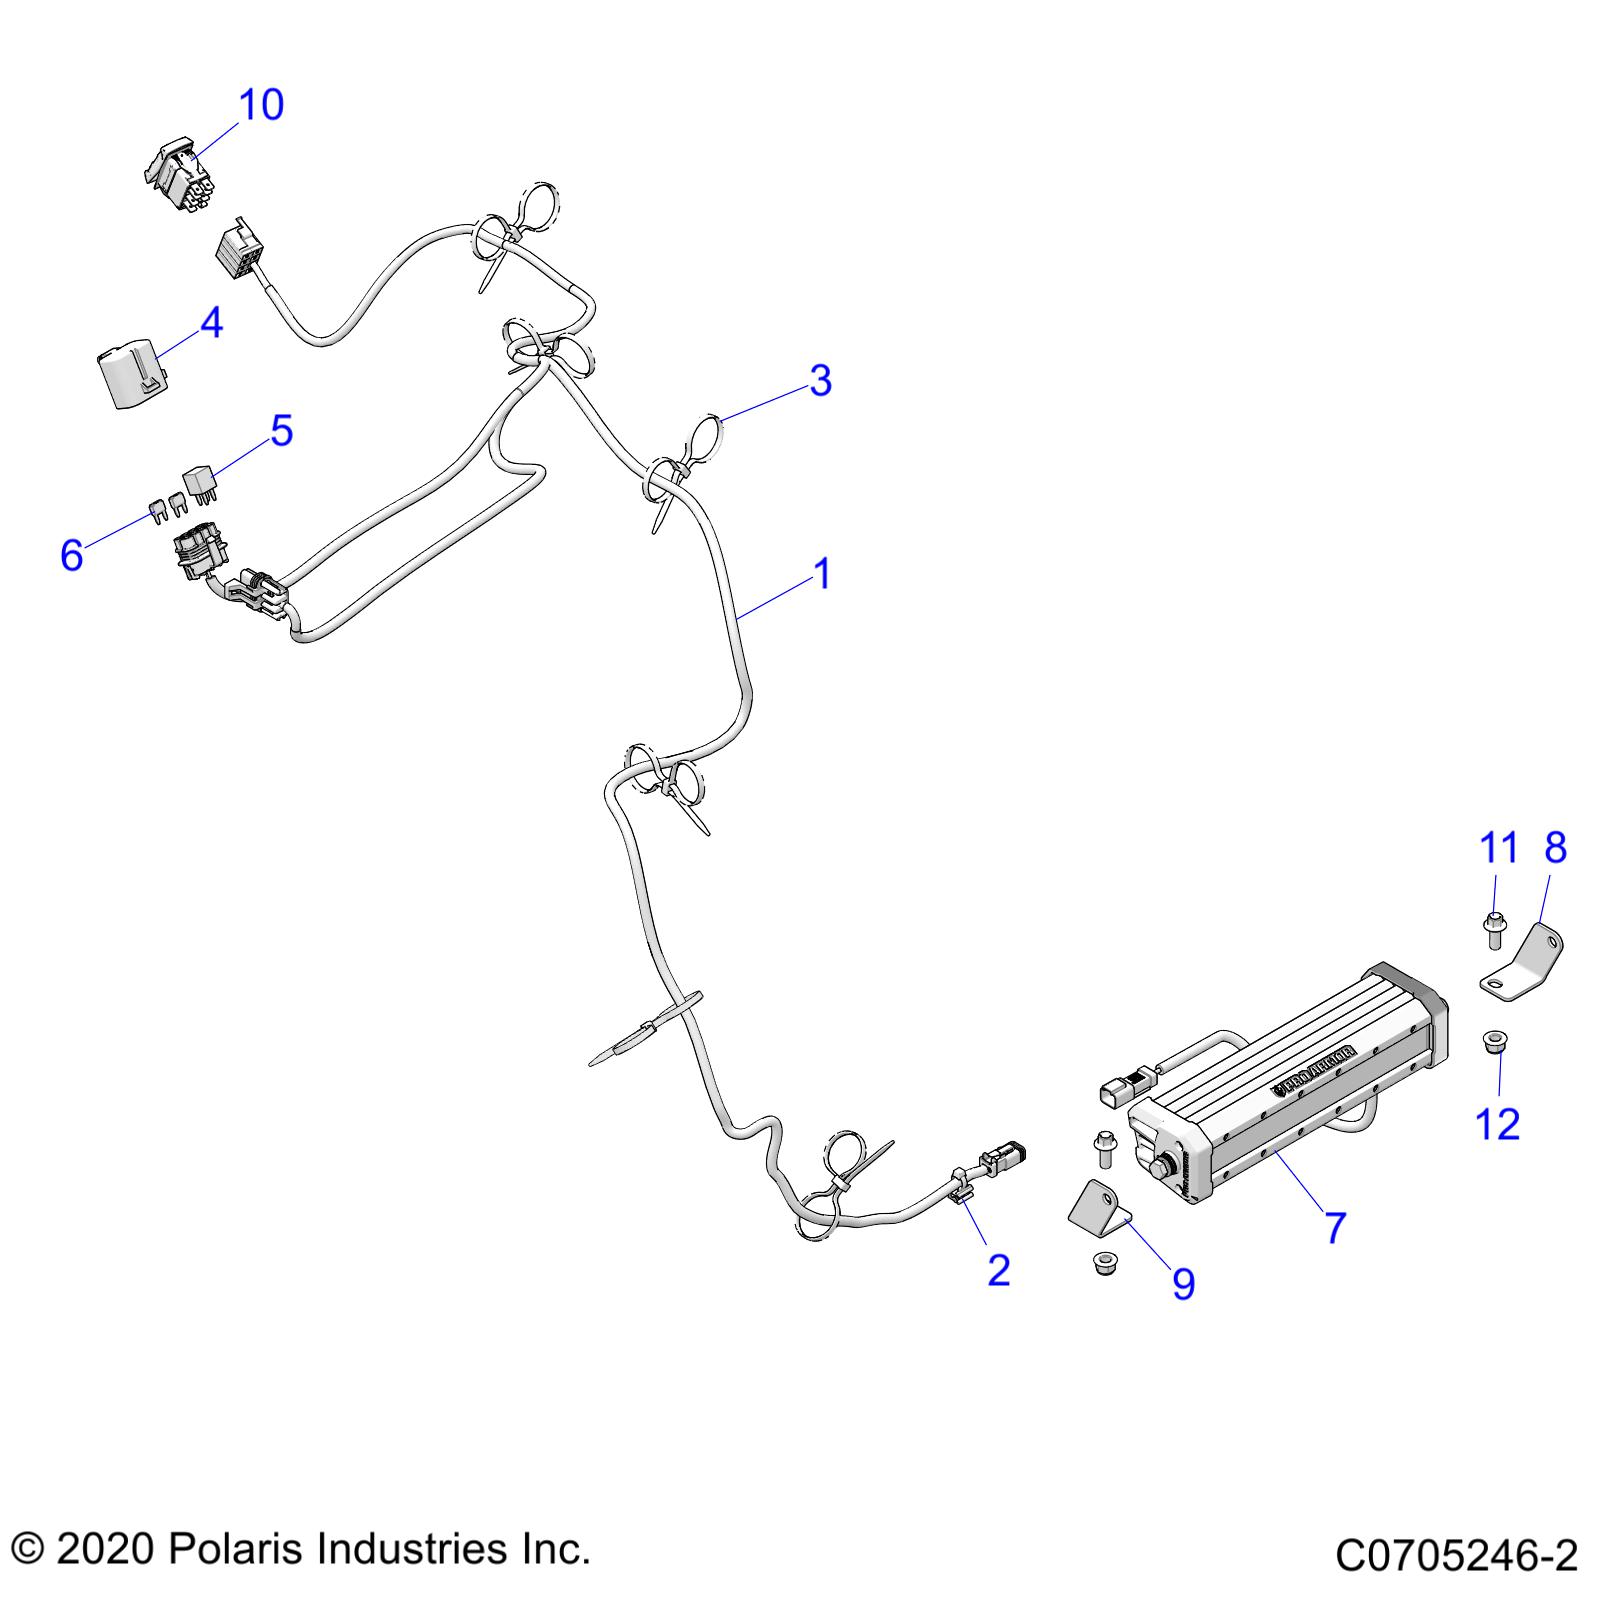 Part Number : 4014558 LIGHT SWITCH ACCESSORY